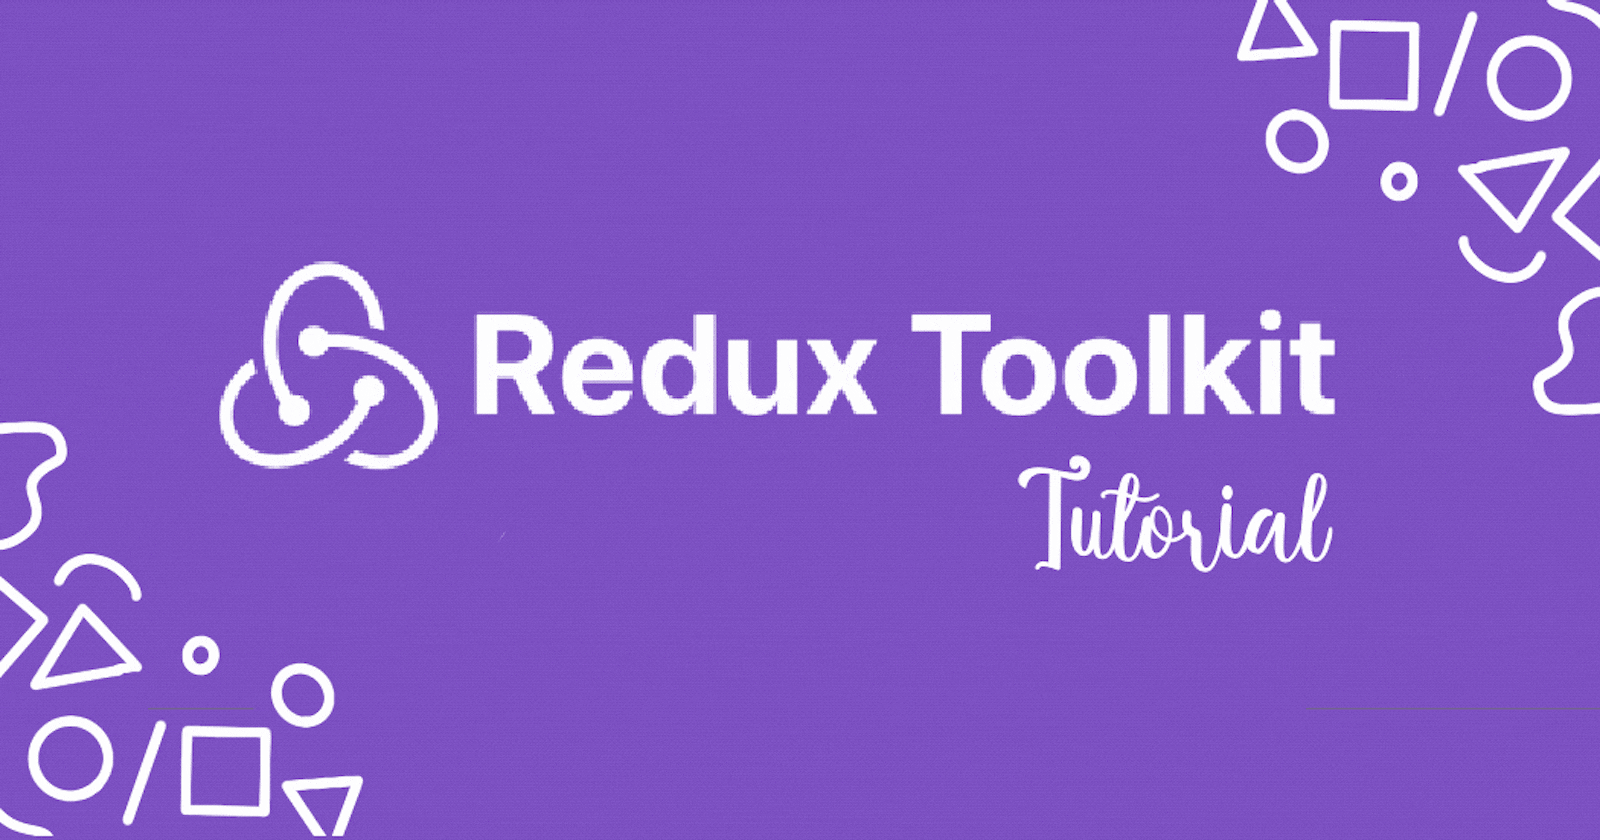 Creating a To-do list app using Redux Toolkit